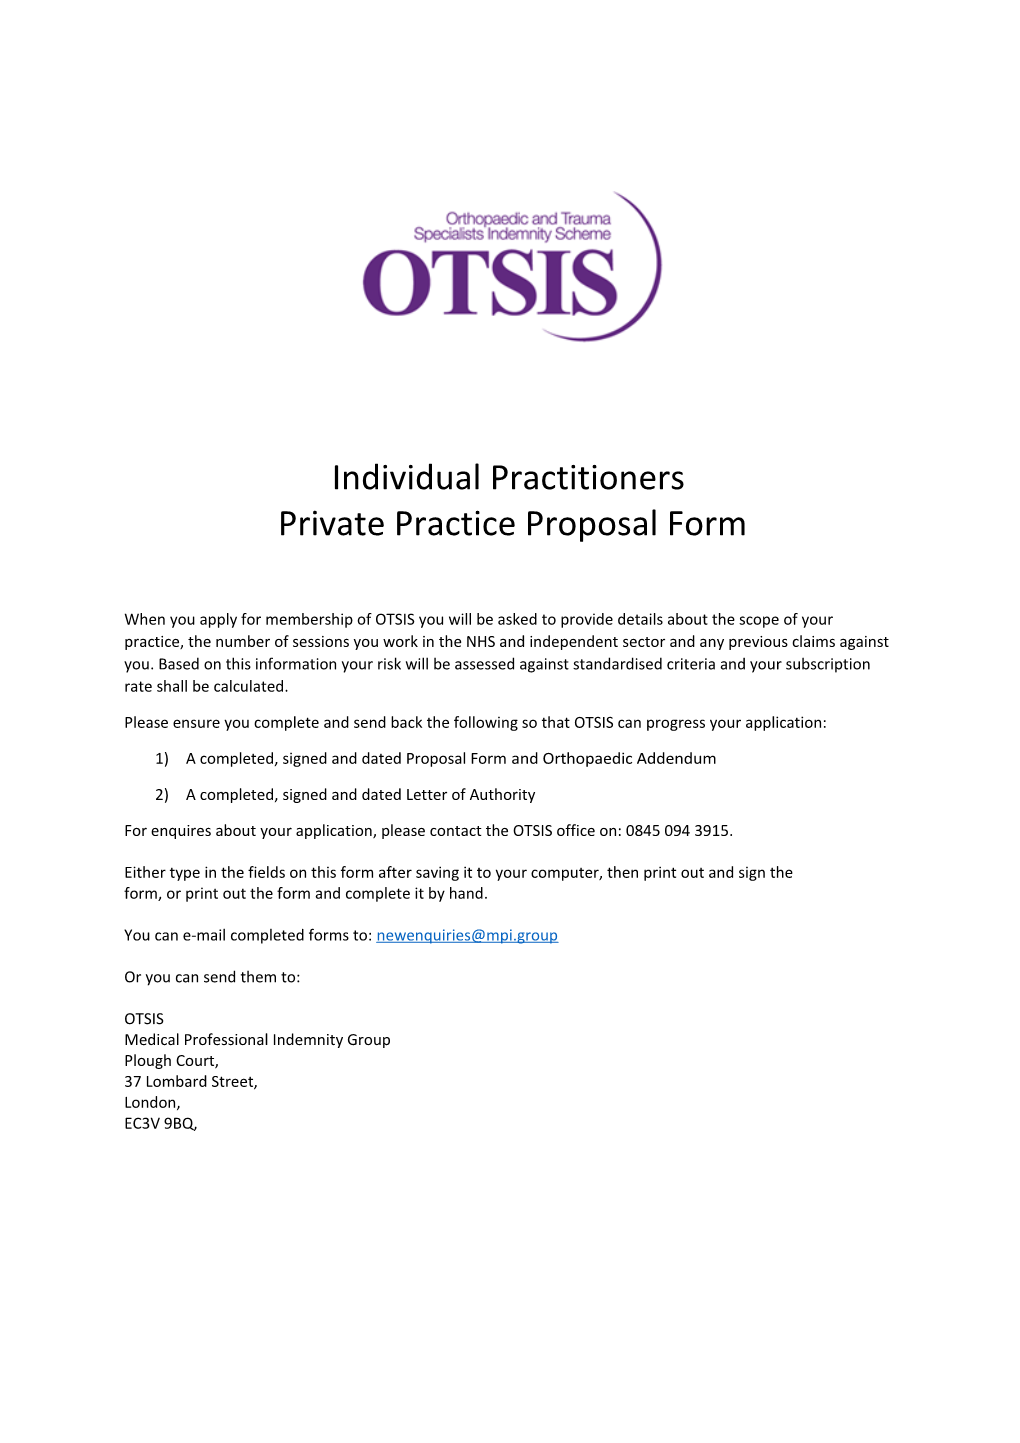 Individual Practitioners Private Practice Proposal Form